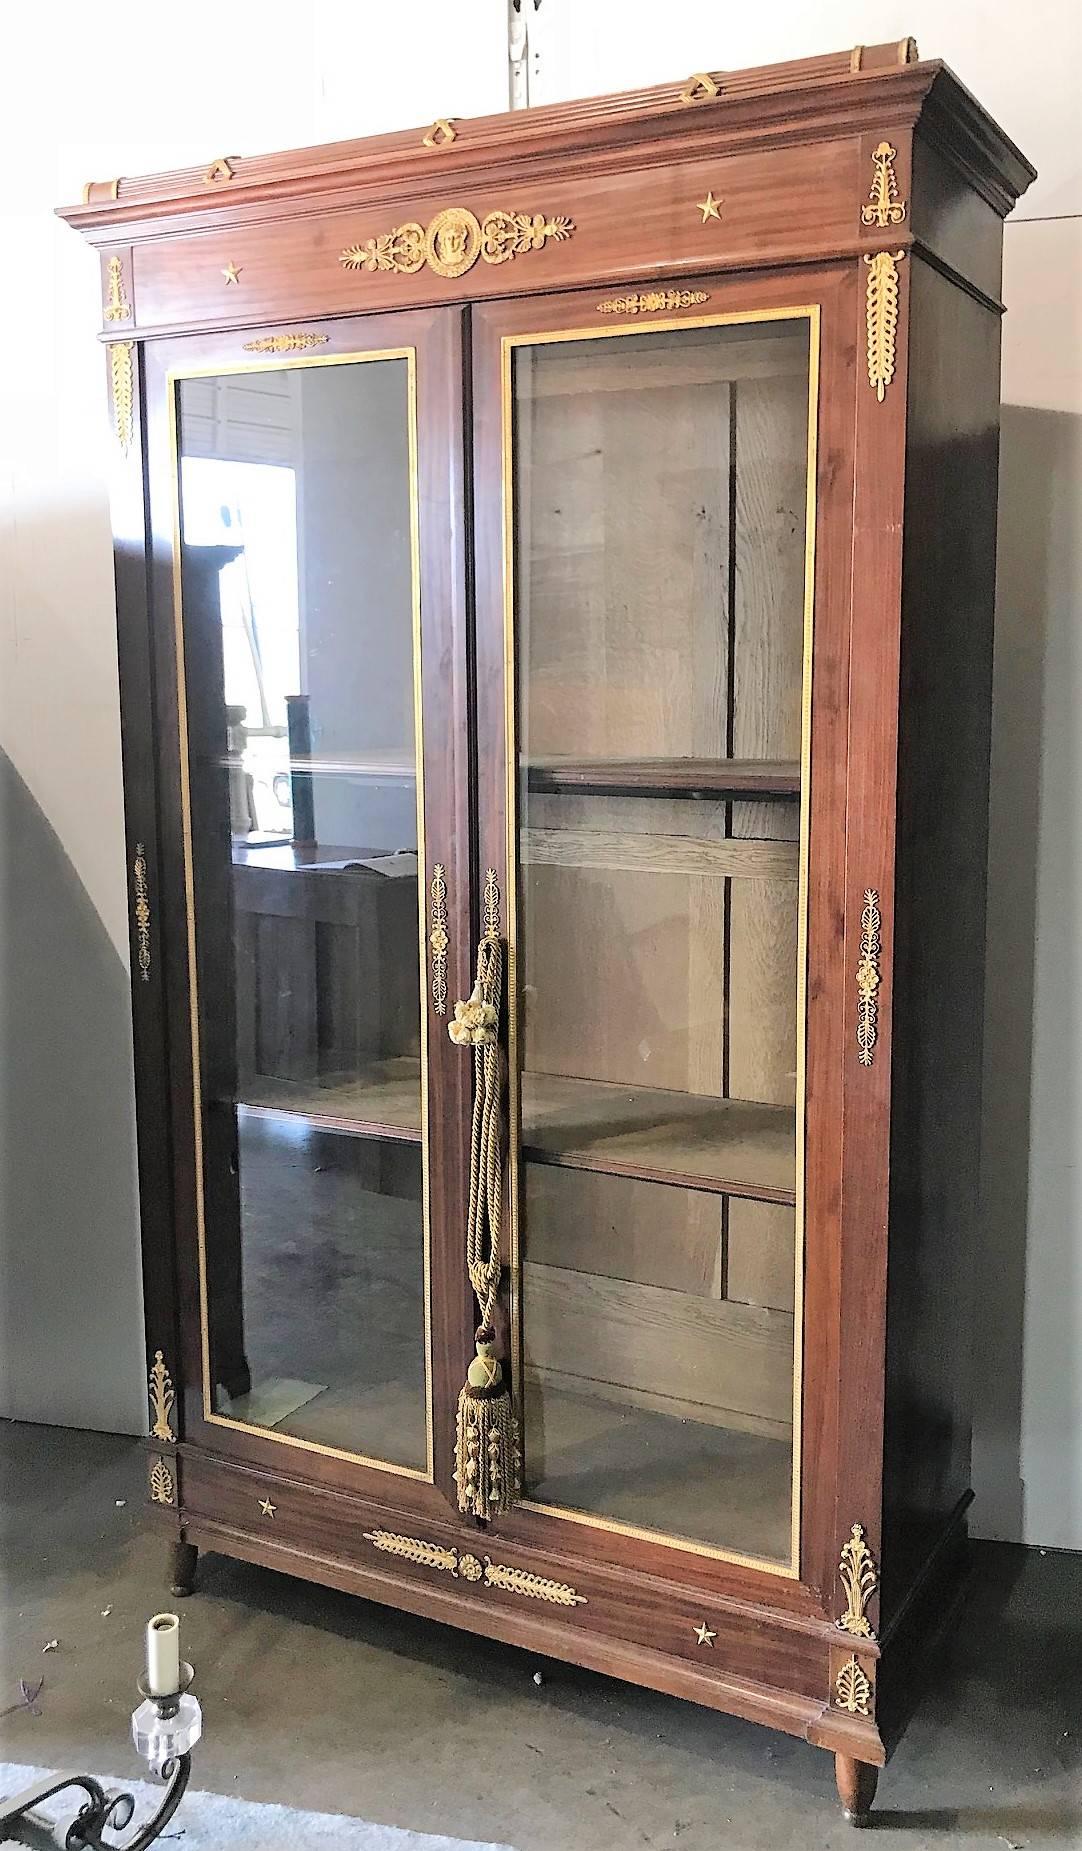 Particularly fine quality 19th century French Empire mahogany display cabinet or bibliotheque/bookcase with two large glass fronted doors trimmed in doré bronze and fitted with interior shelves. Appointed with exquisite and finely detailed gold